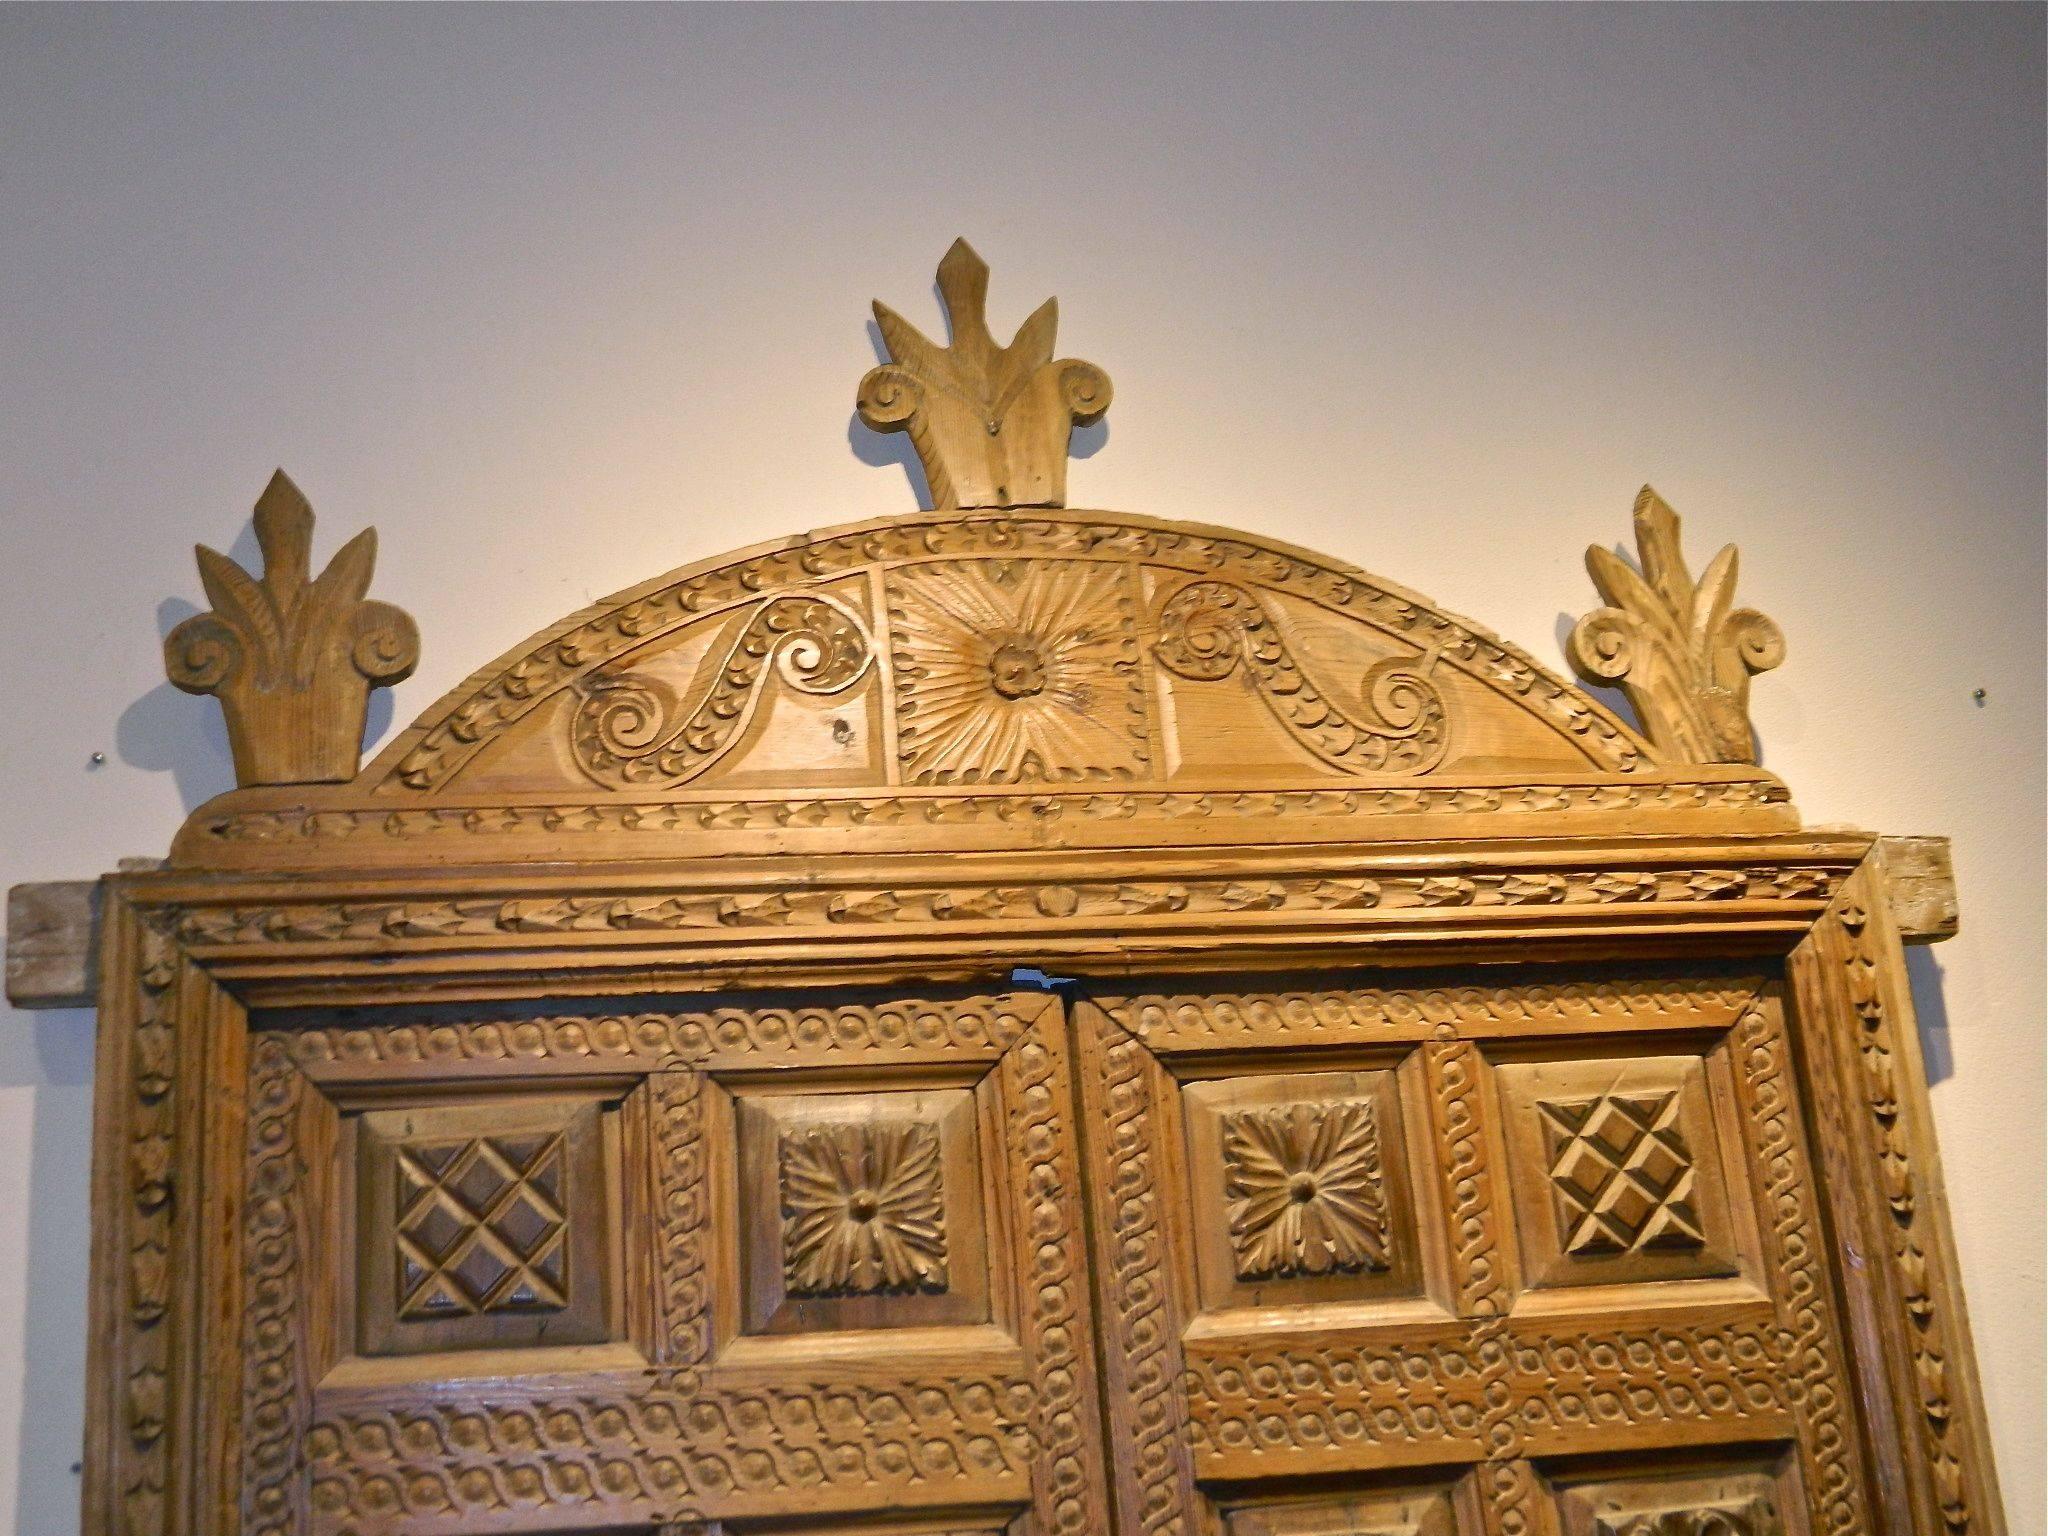 Perhaps the most spectacular architectural element that we have ever
come across, this two-panel 16th century sacristy door was found in the
village of Biescas (province of Huesca) in the Spanish Pyrenees.

The crown, frame and structure of this